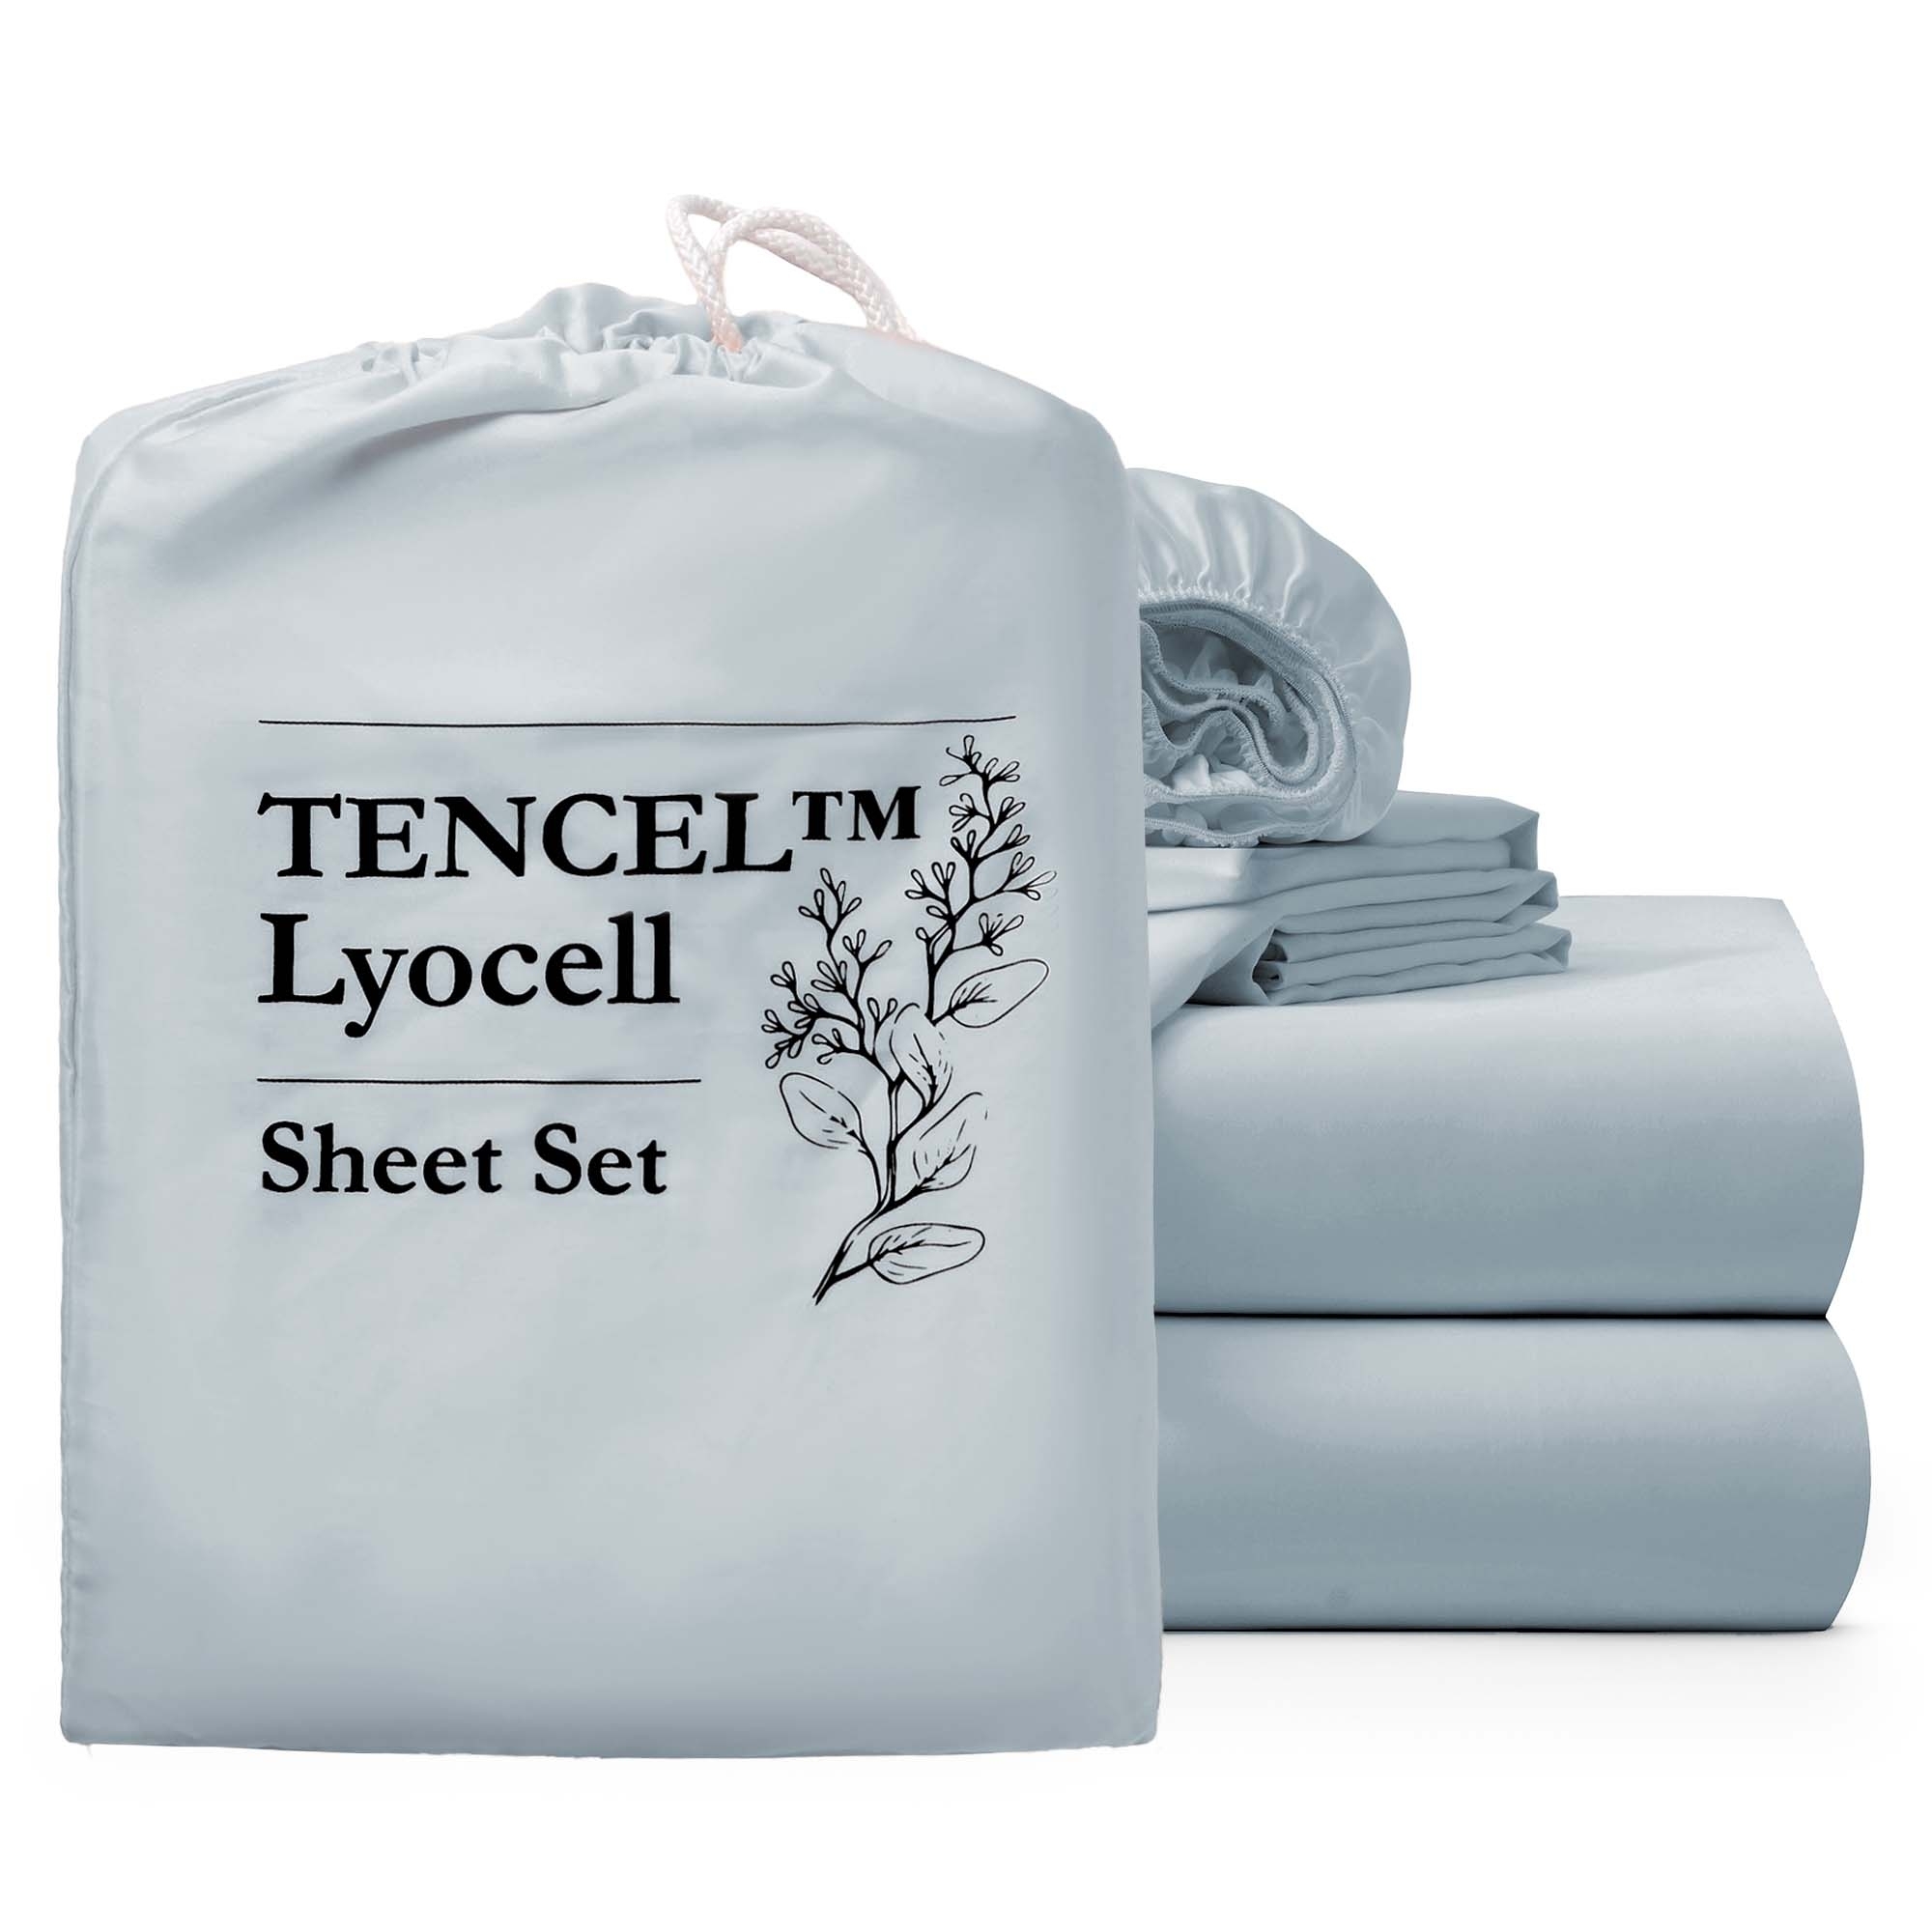 Cooling Sheets For Hot Sleepers, TENCELâ¢ Lyocell Sheets, Deep Pocket, Hotel Sheets - Twin Size